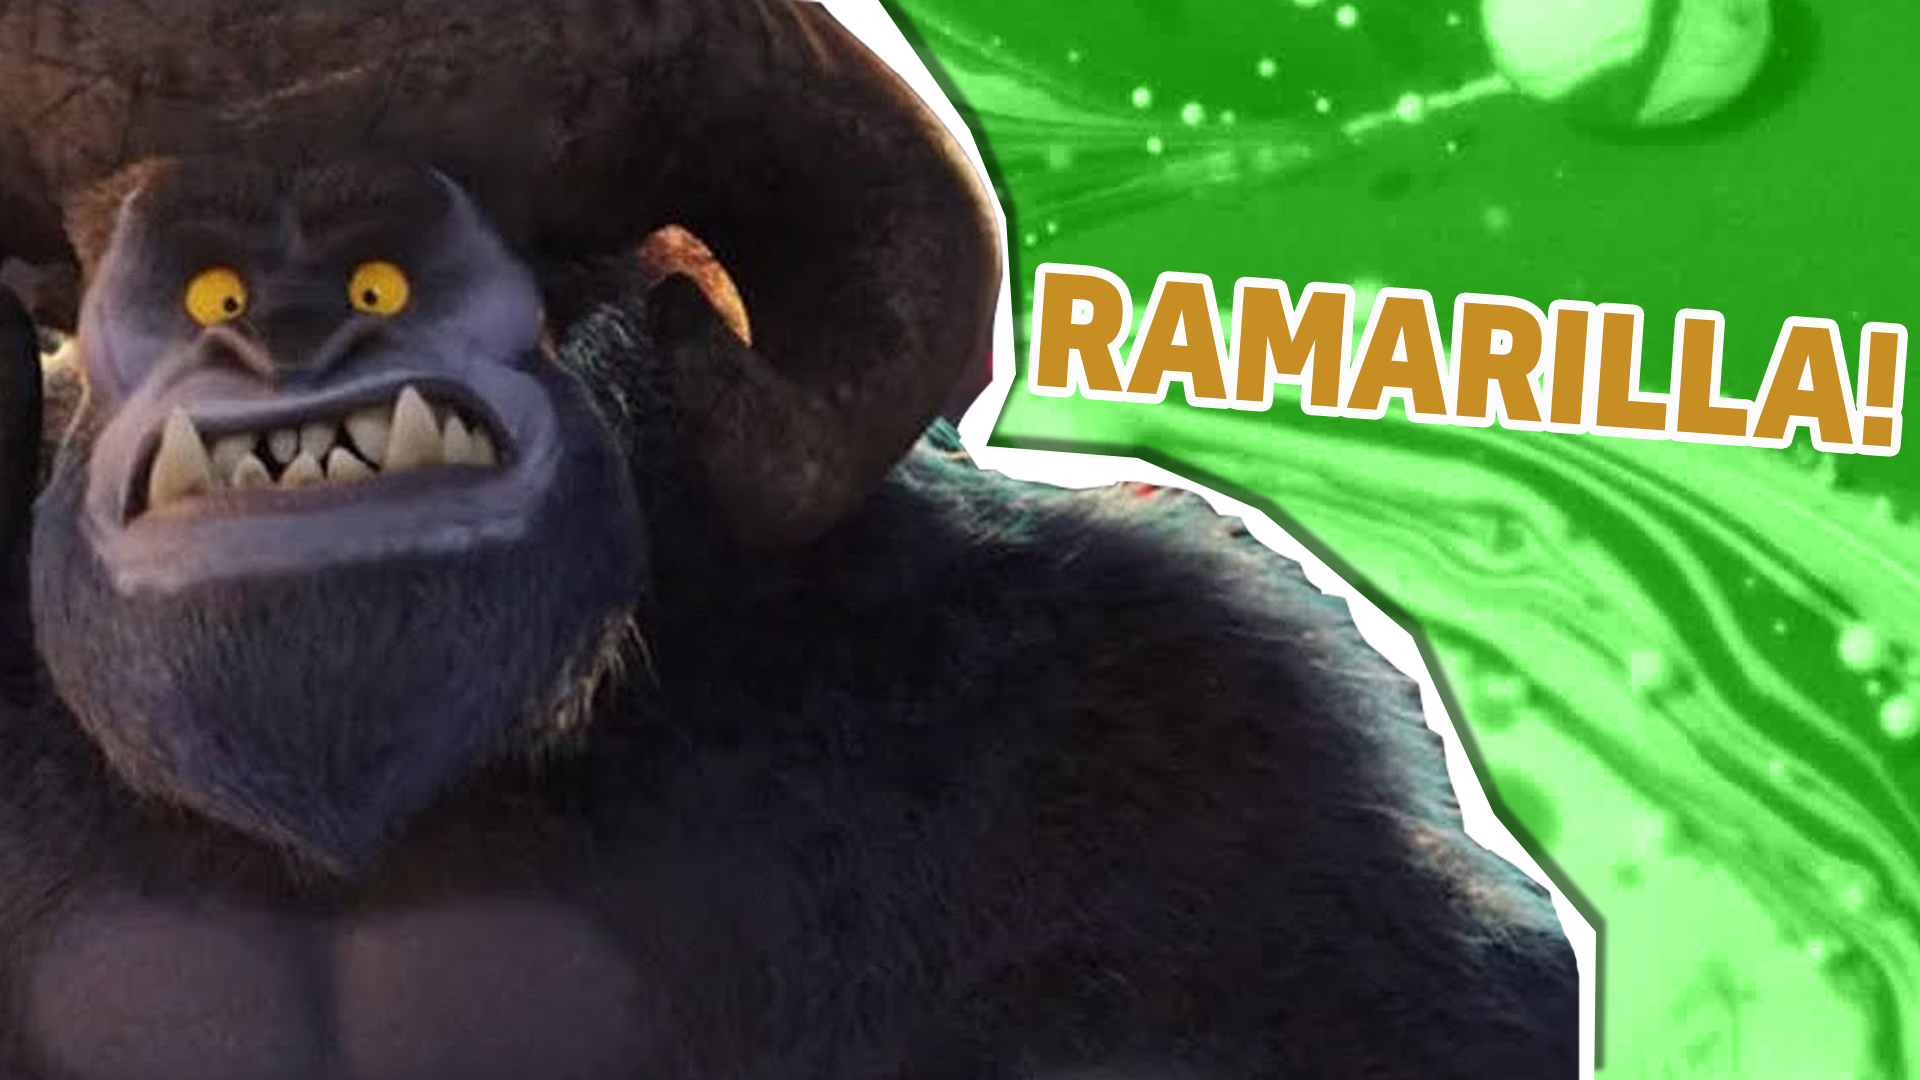 You're Ramarilla! You're talented and strong, although sometimes you can lost your temper! You want to be the best at everything!